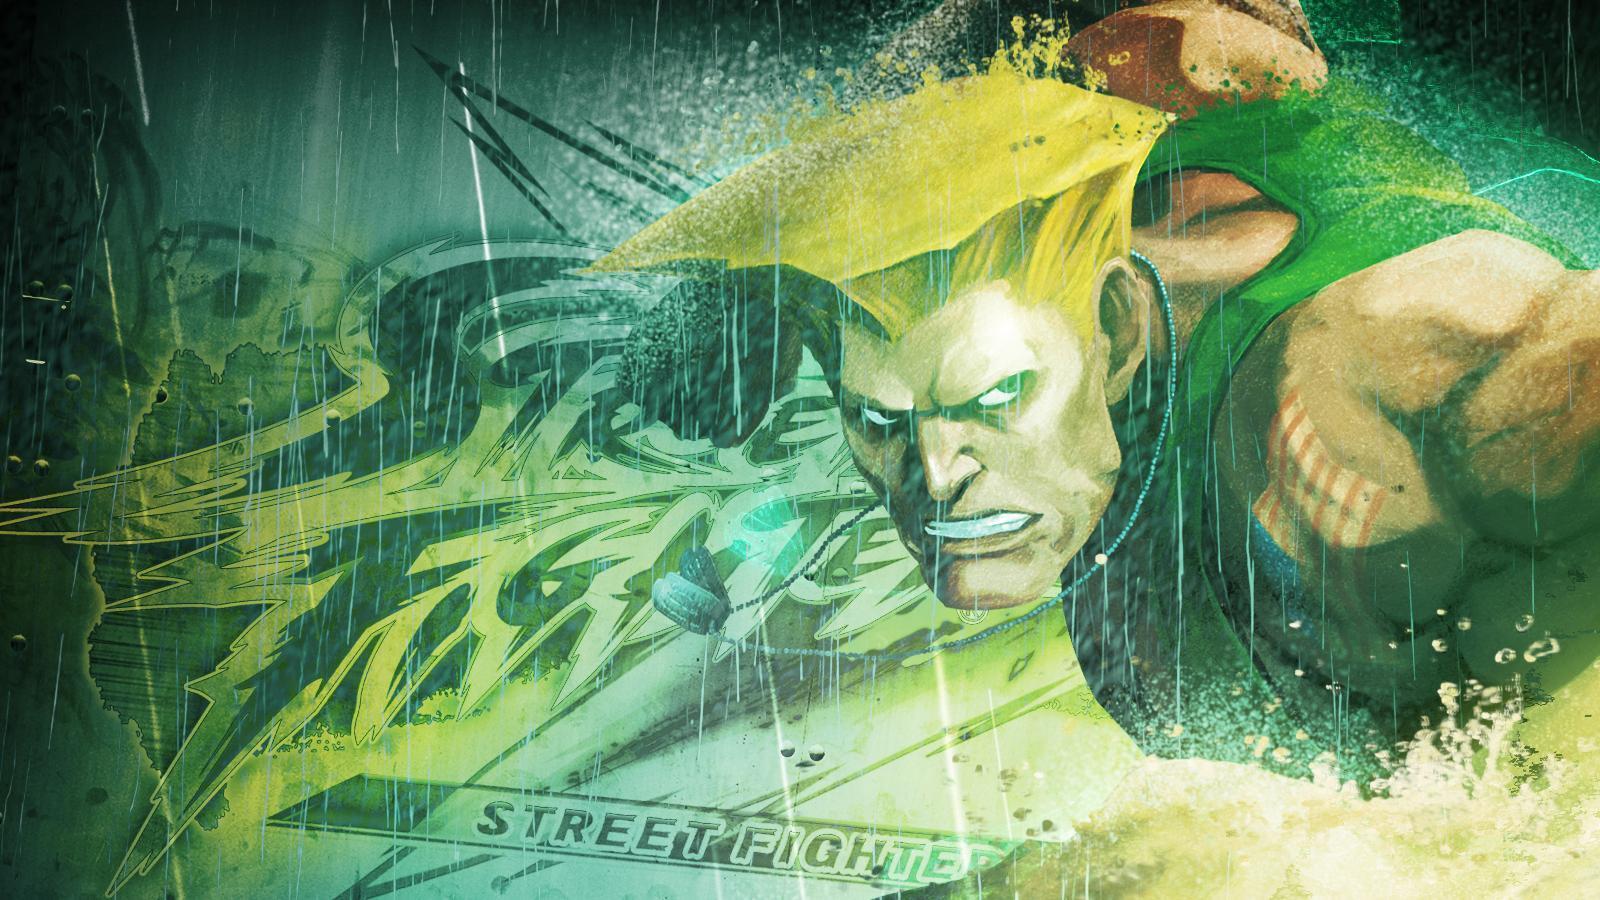 guile in street fighter wallpaper Search Engine